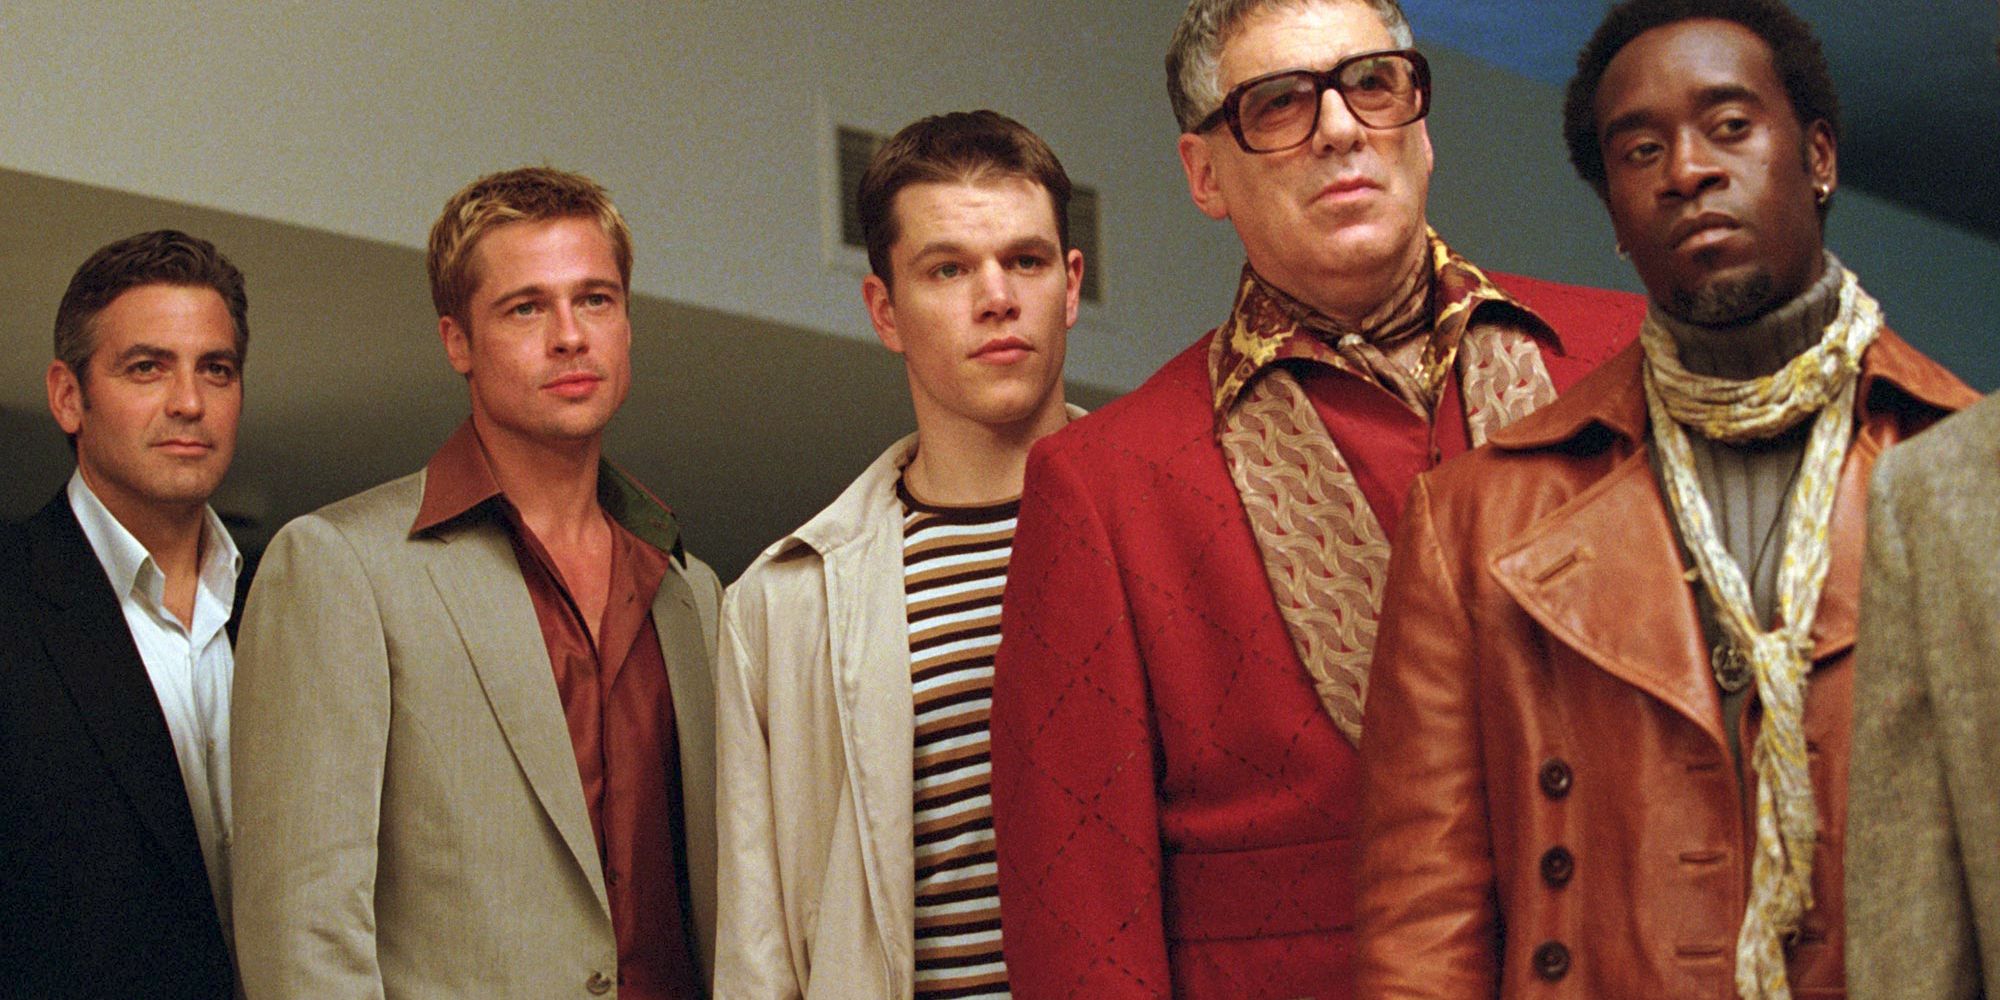 A crew of criminals stand together as they plan a casino heist in 'Ocean's Eleven'.